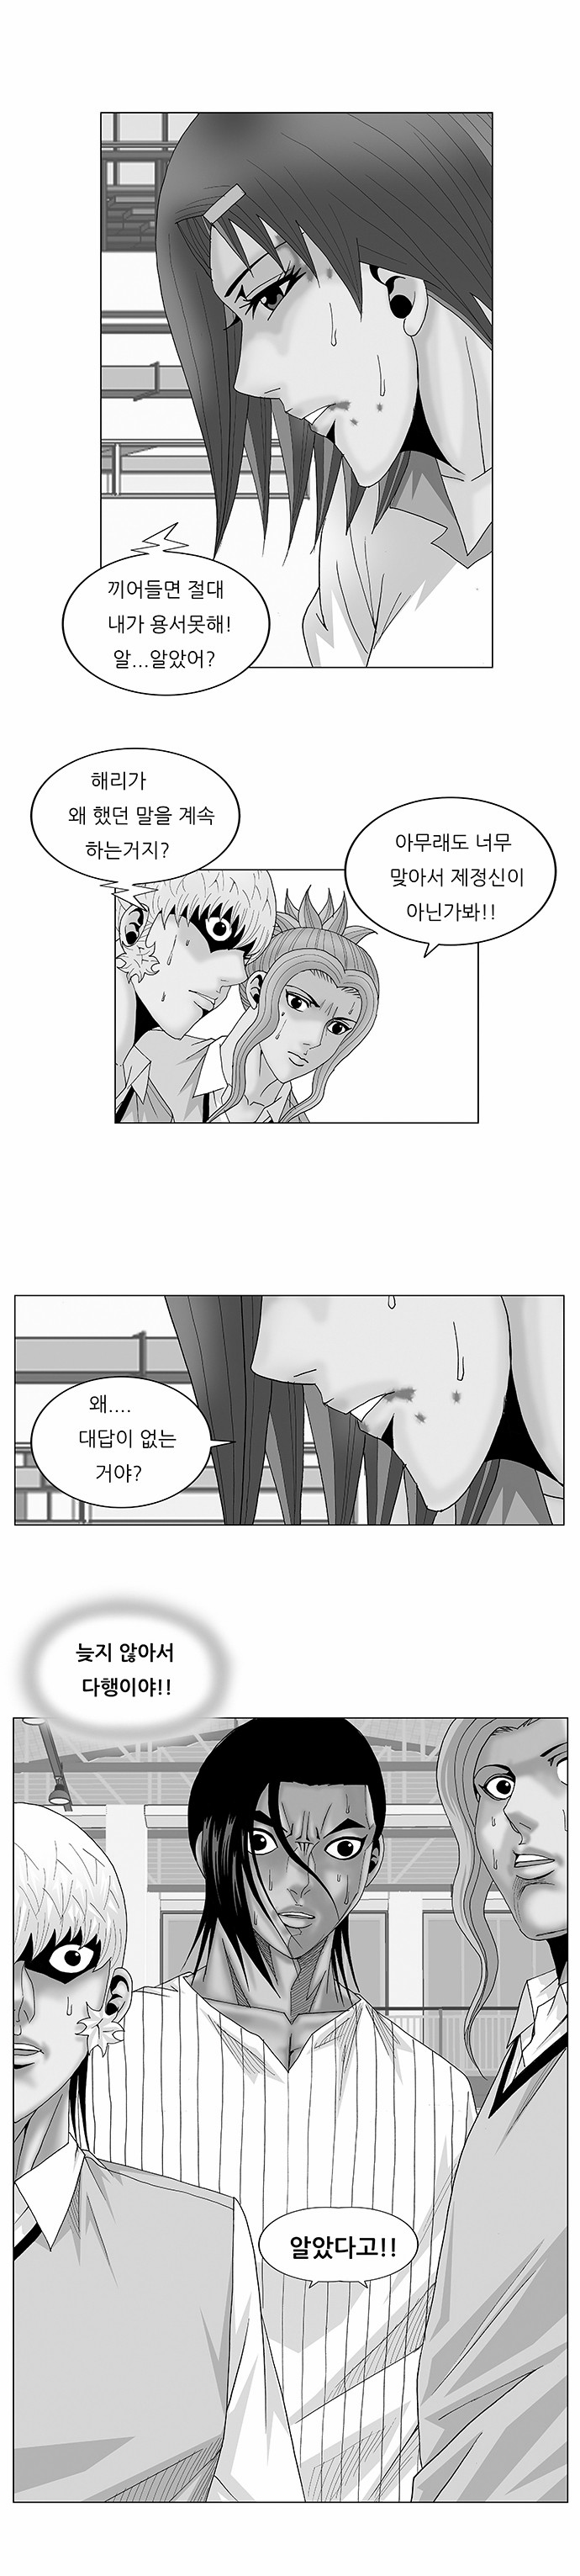 Ultimate Legend - Kang Hae Hyo - Chapter 106 - Page 1